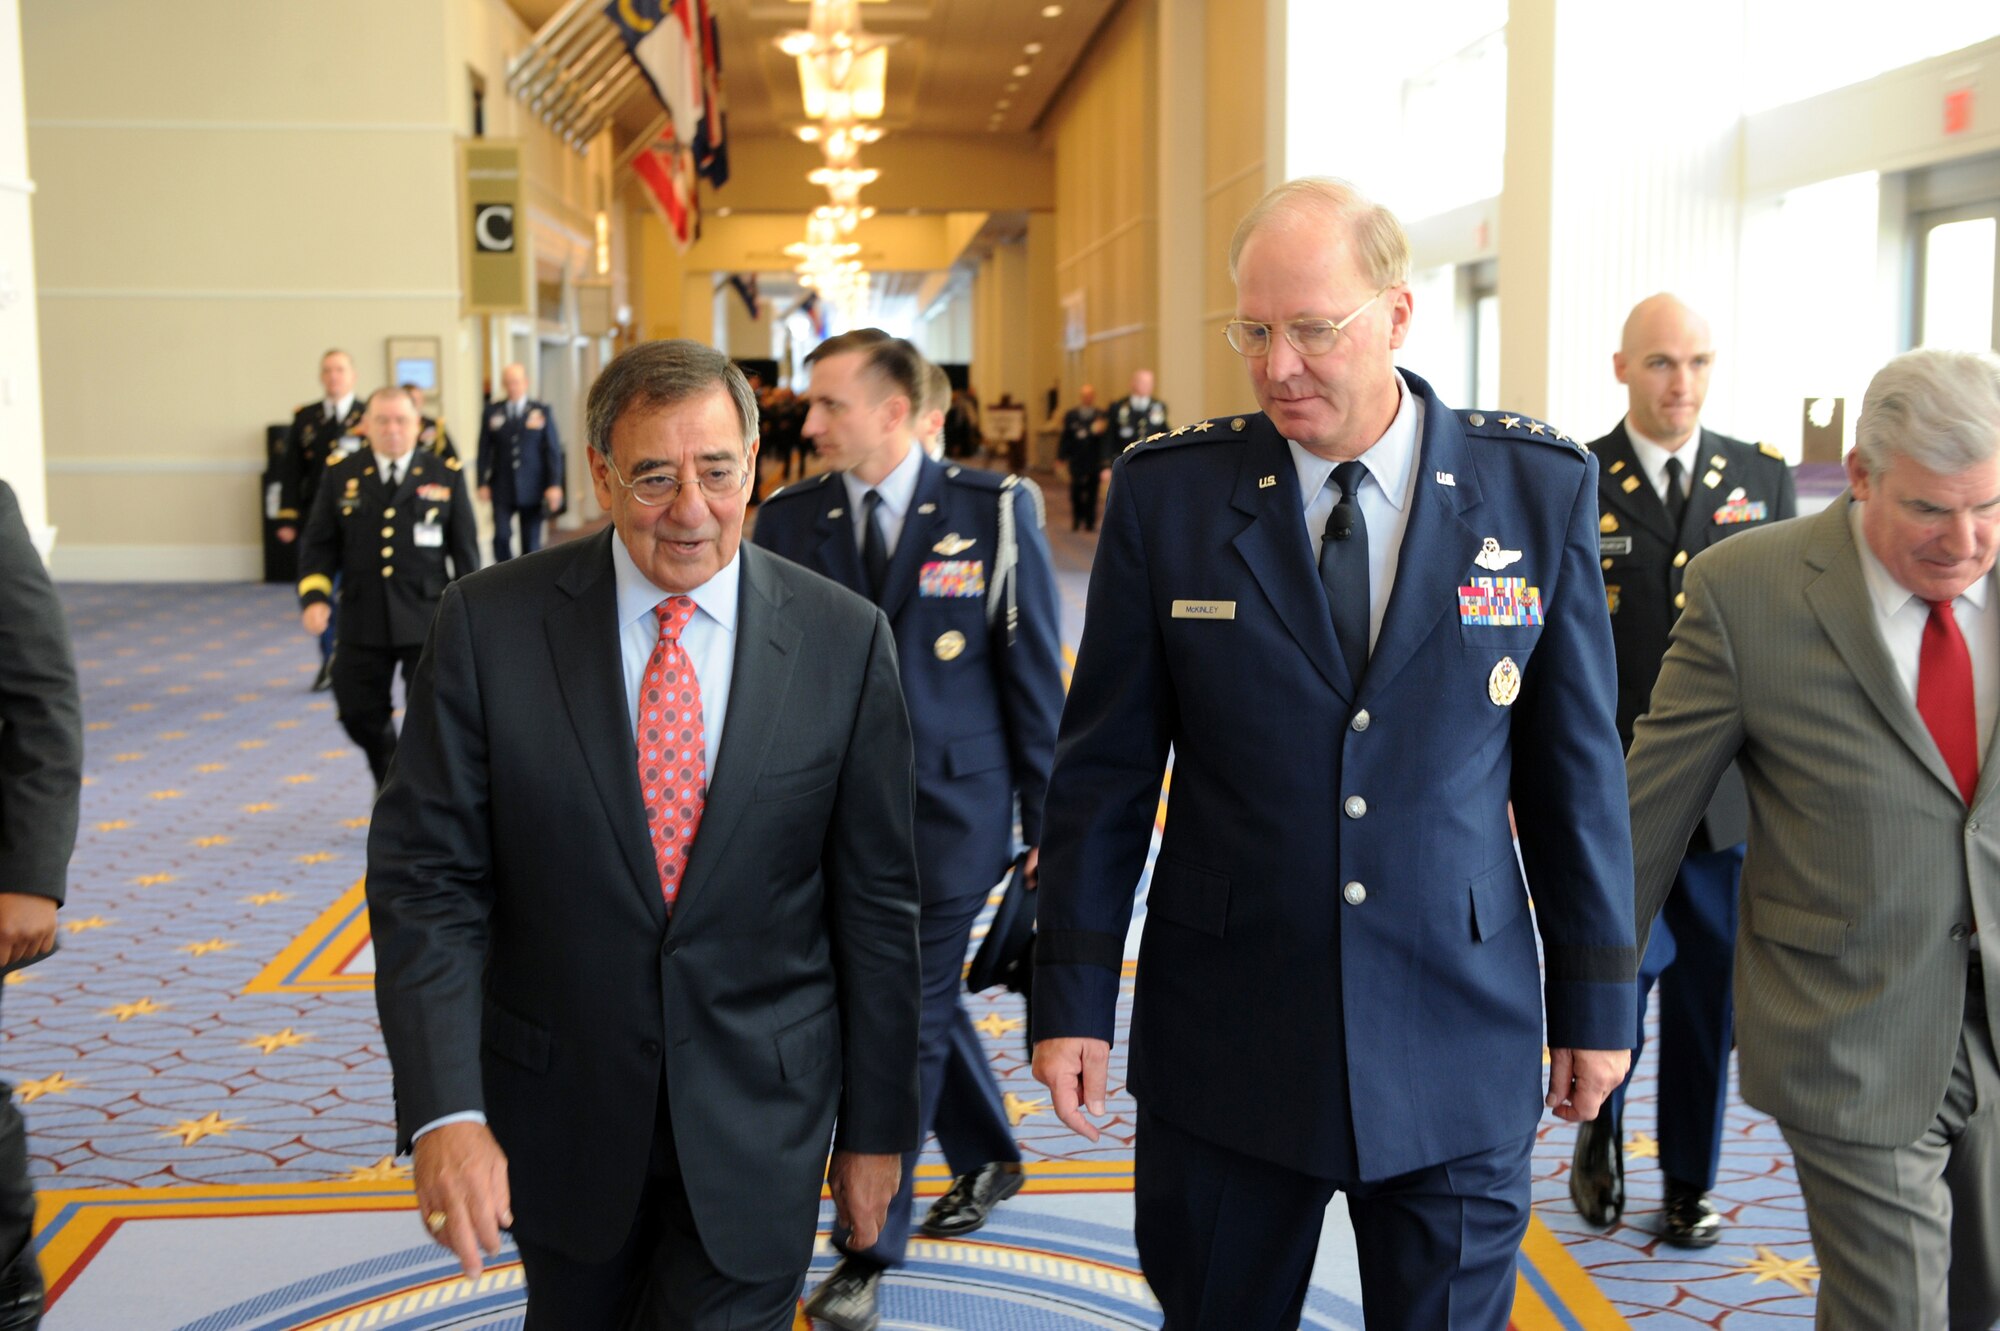 Secretary of Defense Leon Panetta talks with Air Force Gen. Craig McKinley, the chief of the National Guard Bureau, at the National Guard 2011 Joint Senior Leadership Conference in National Harbor, Md., Nov. 8, 2011. (Army National Guard photo by Staff Sgt. Jim Greenhill) (Released)